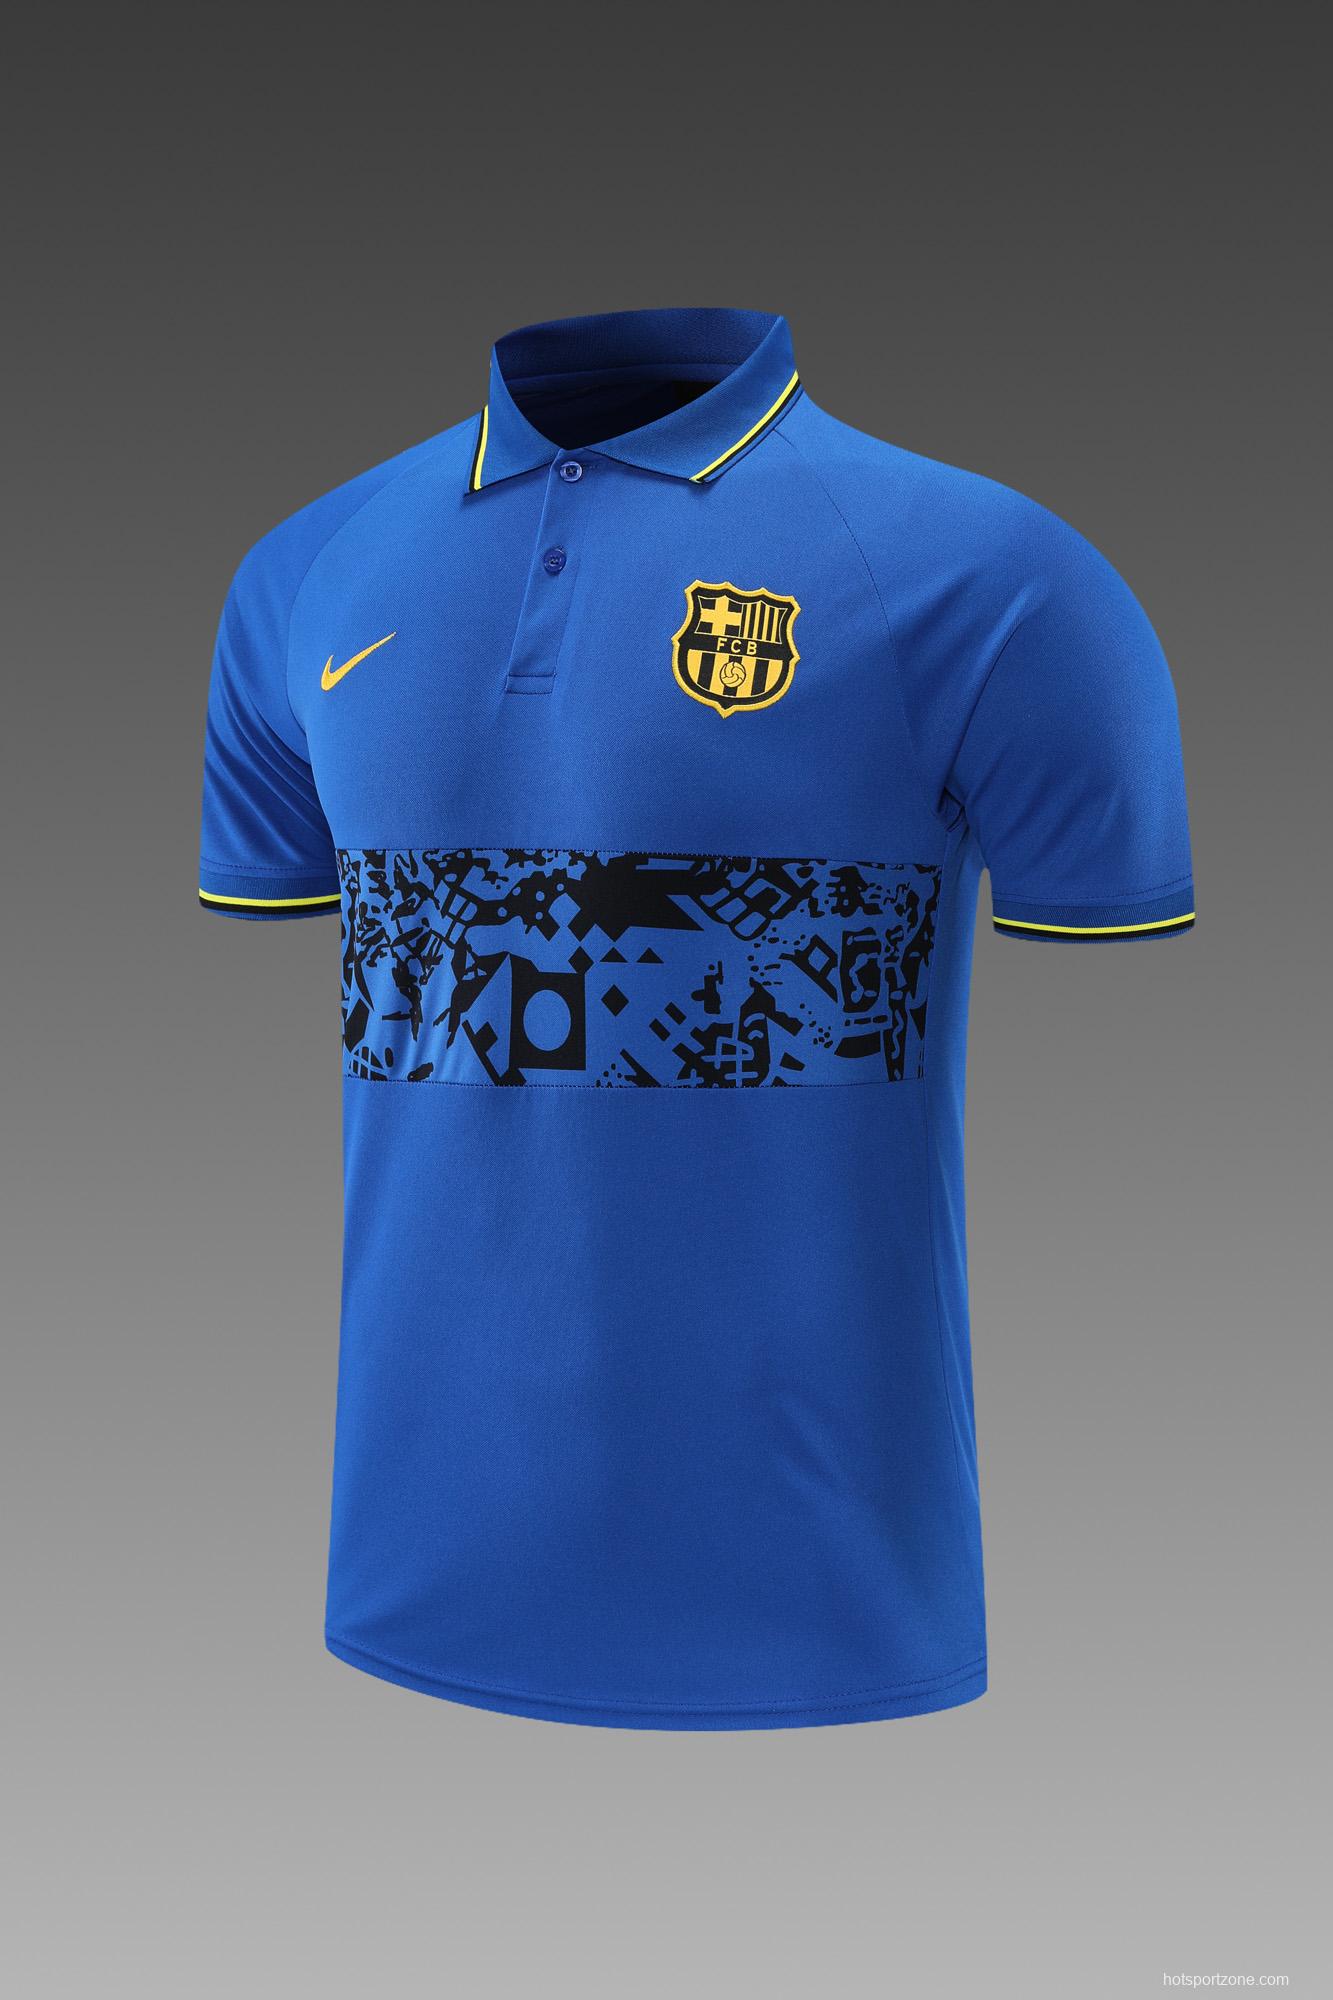 Barcelona POLO kit dark blue (not supported to be sold separately)